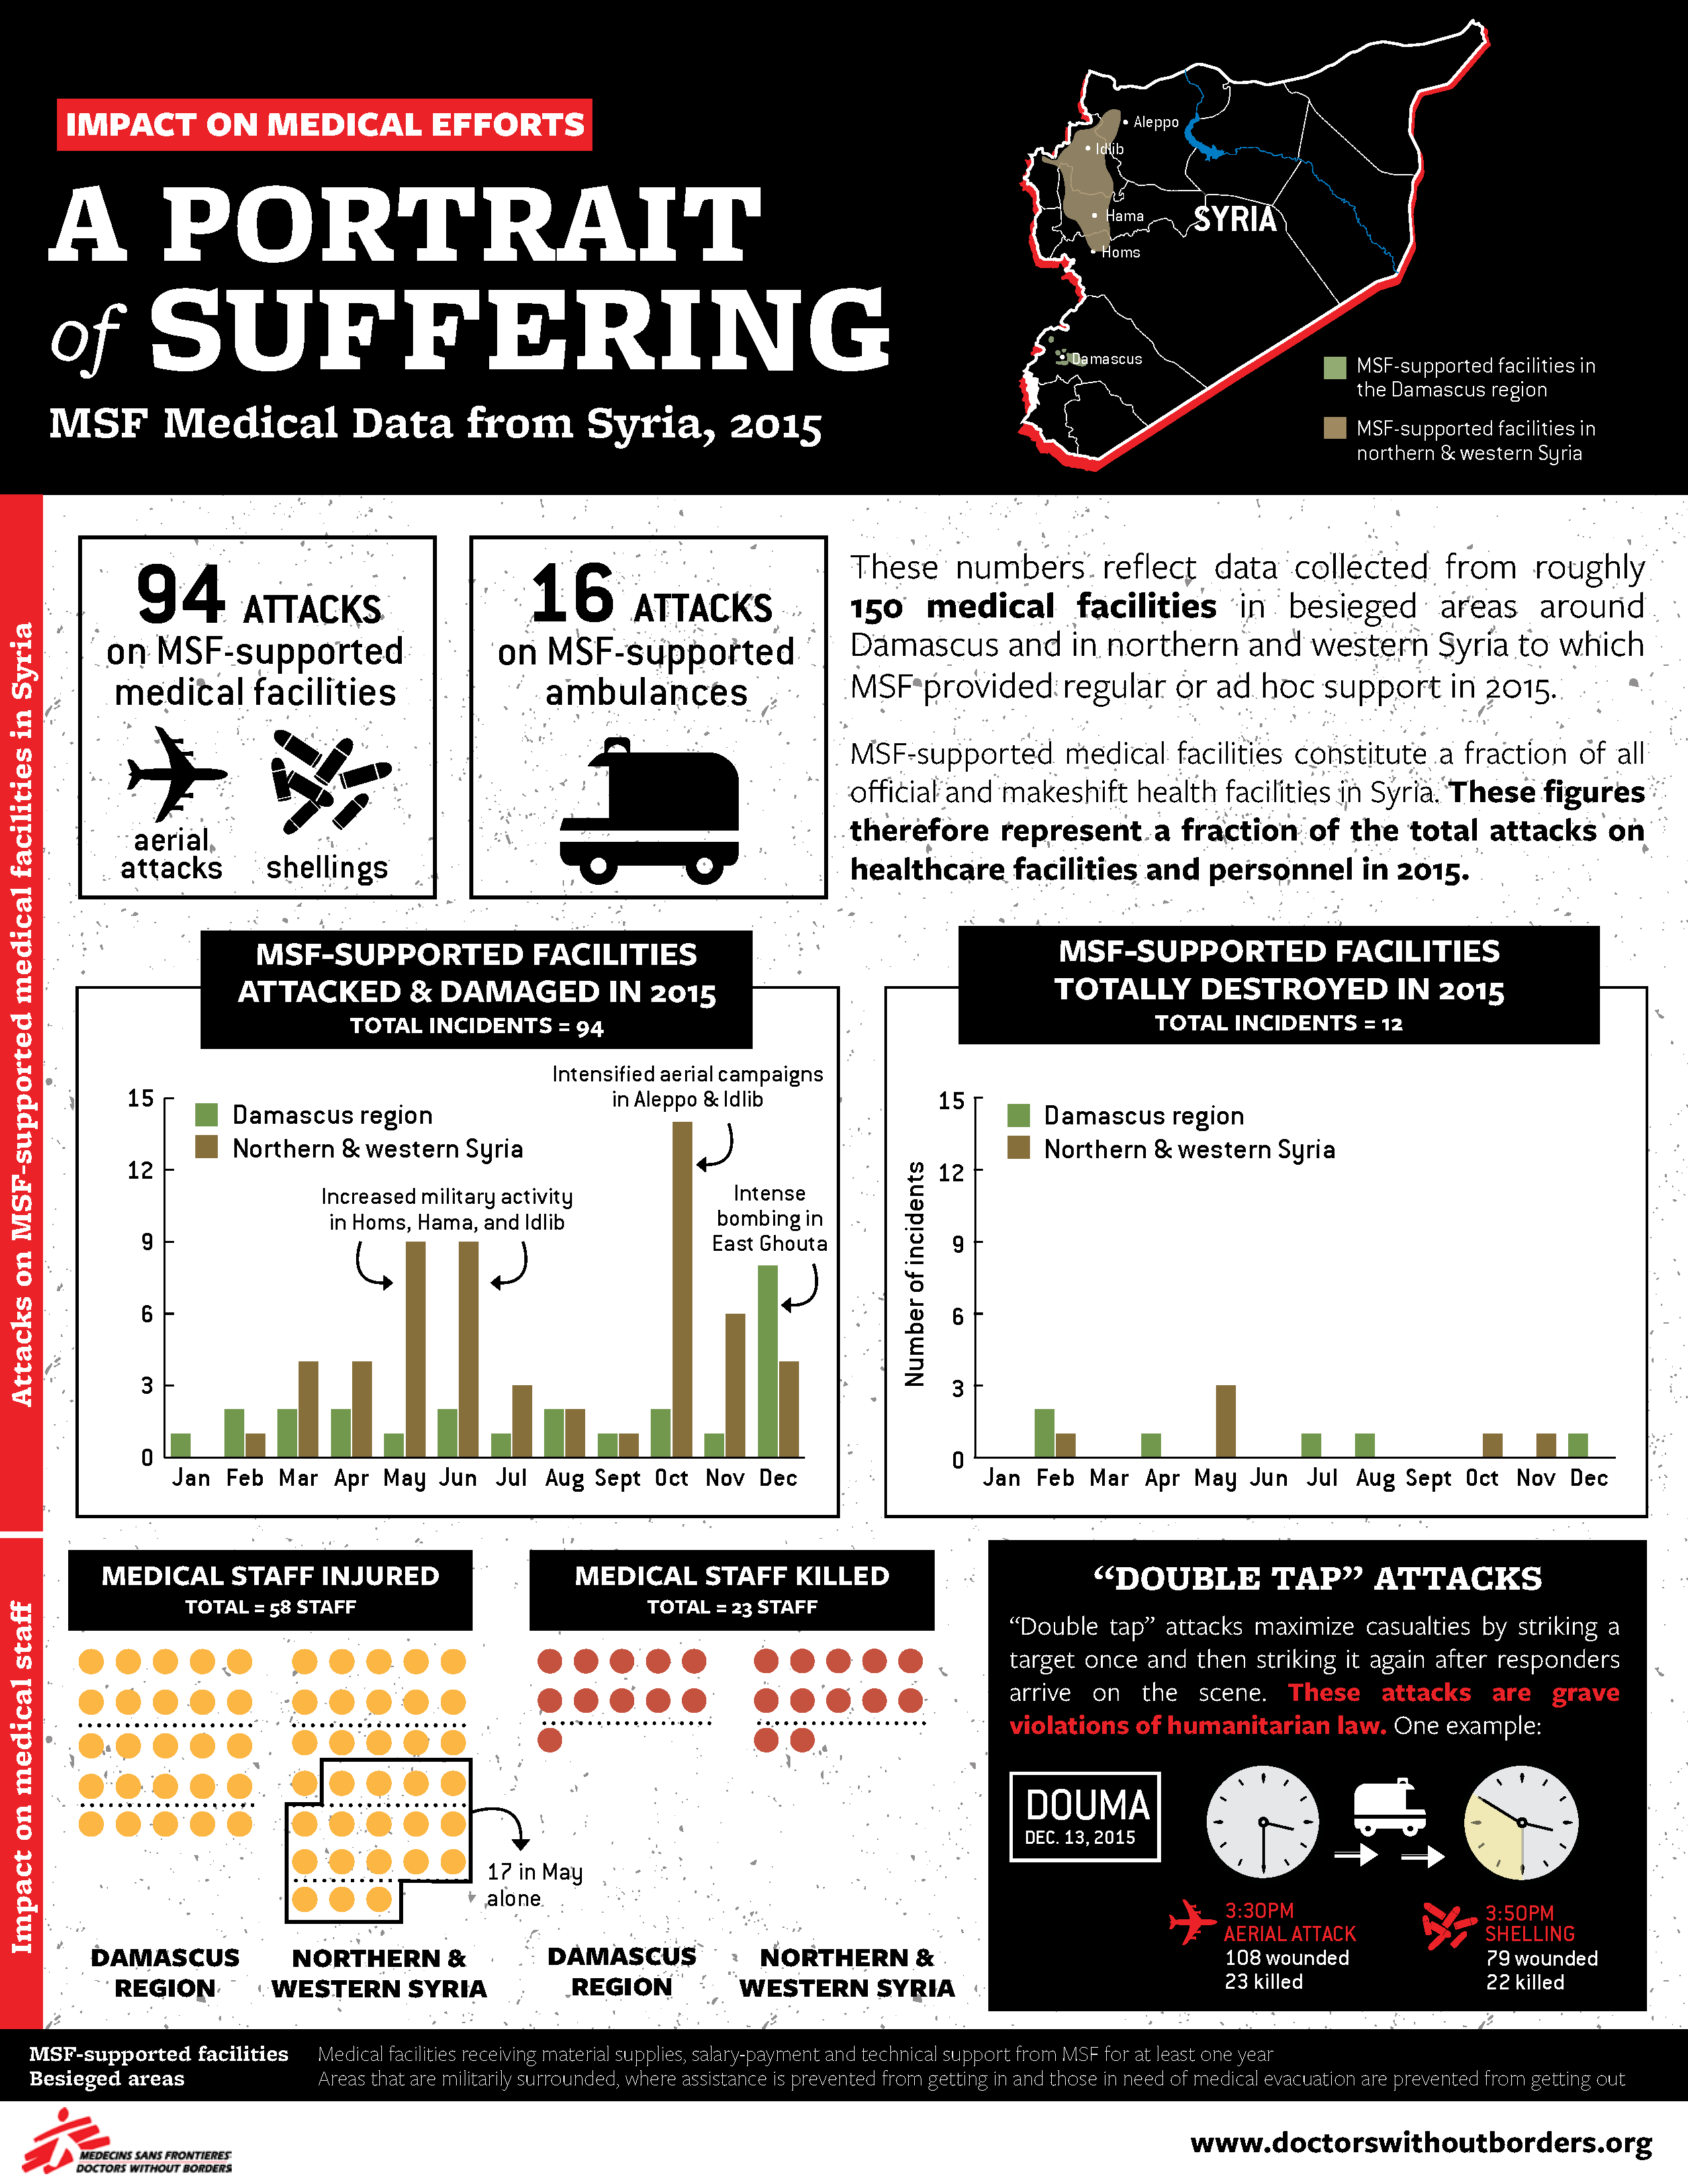 Syria: A Portrait of Suffering